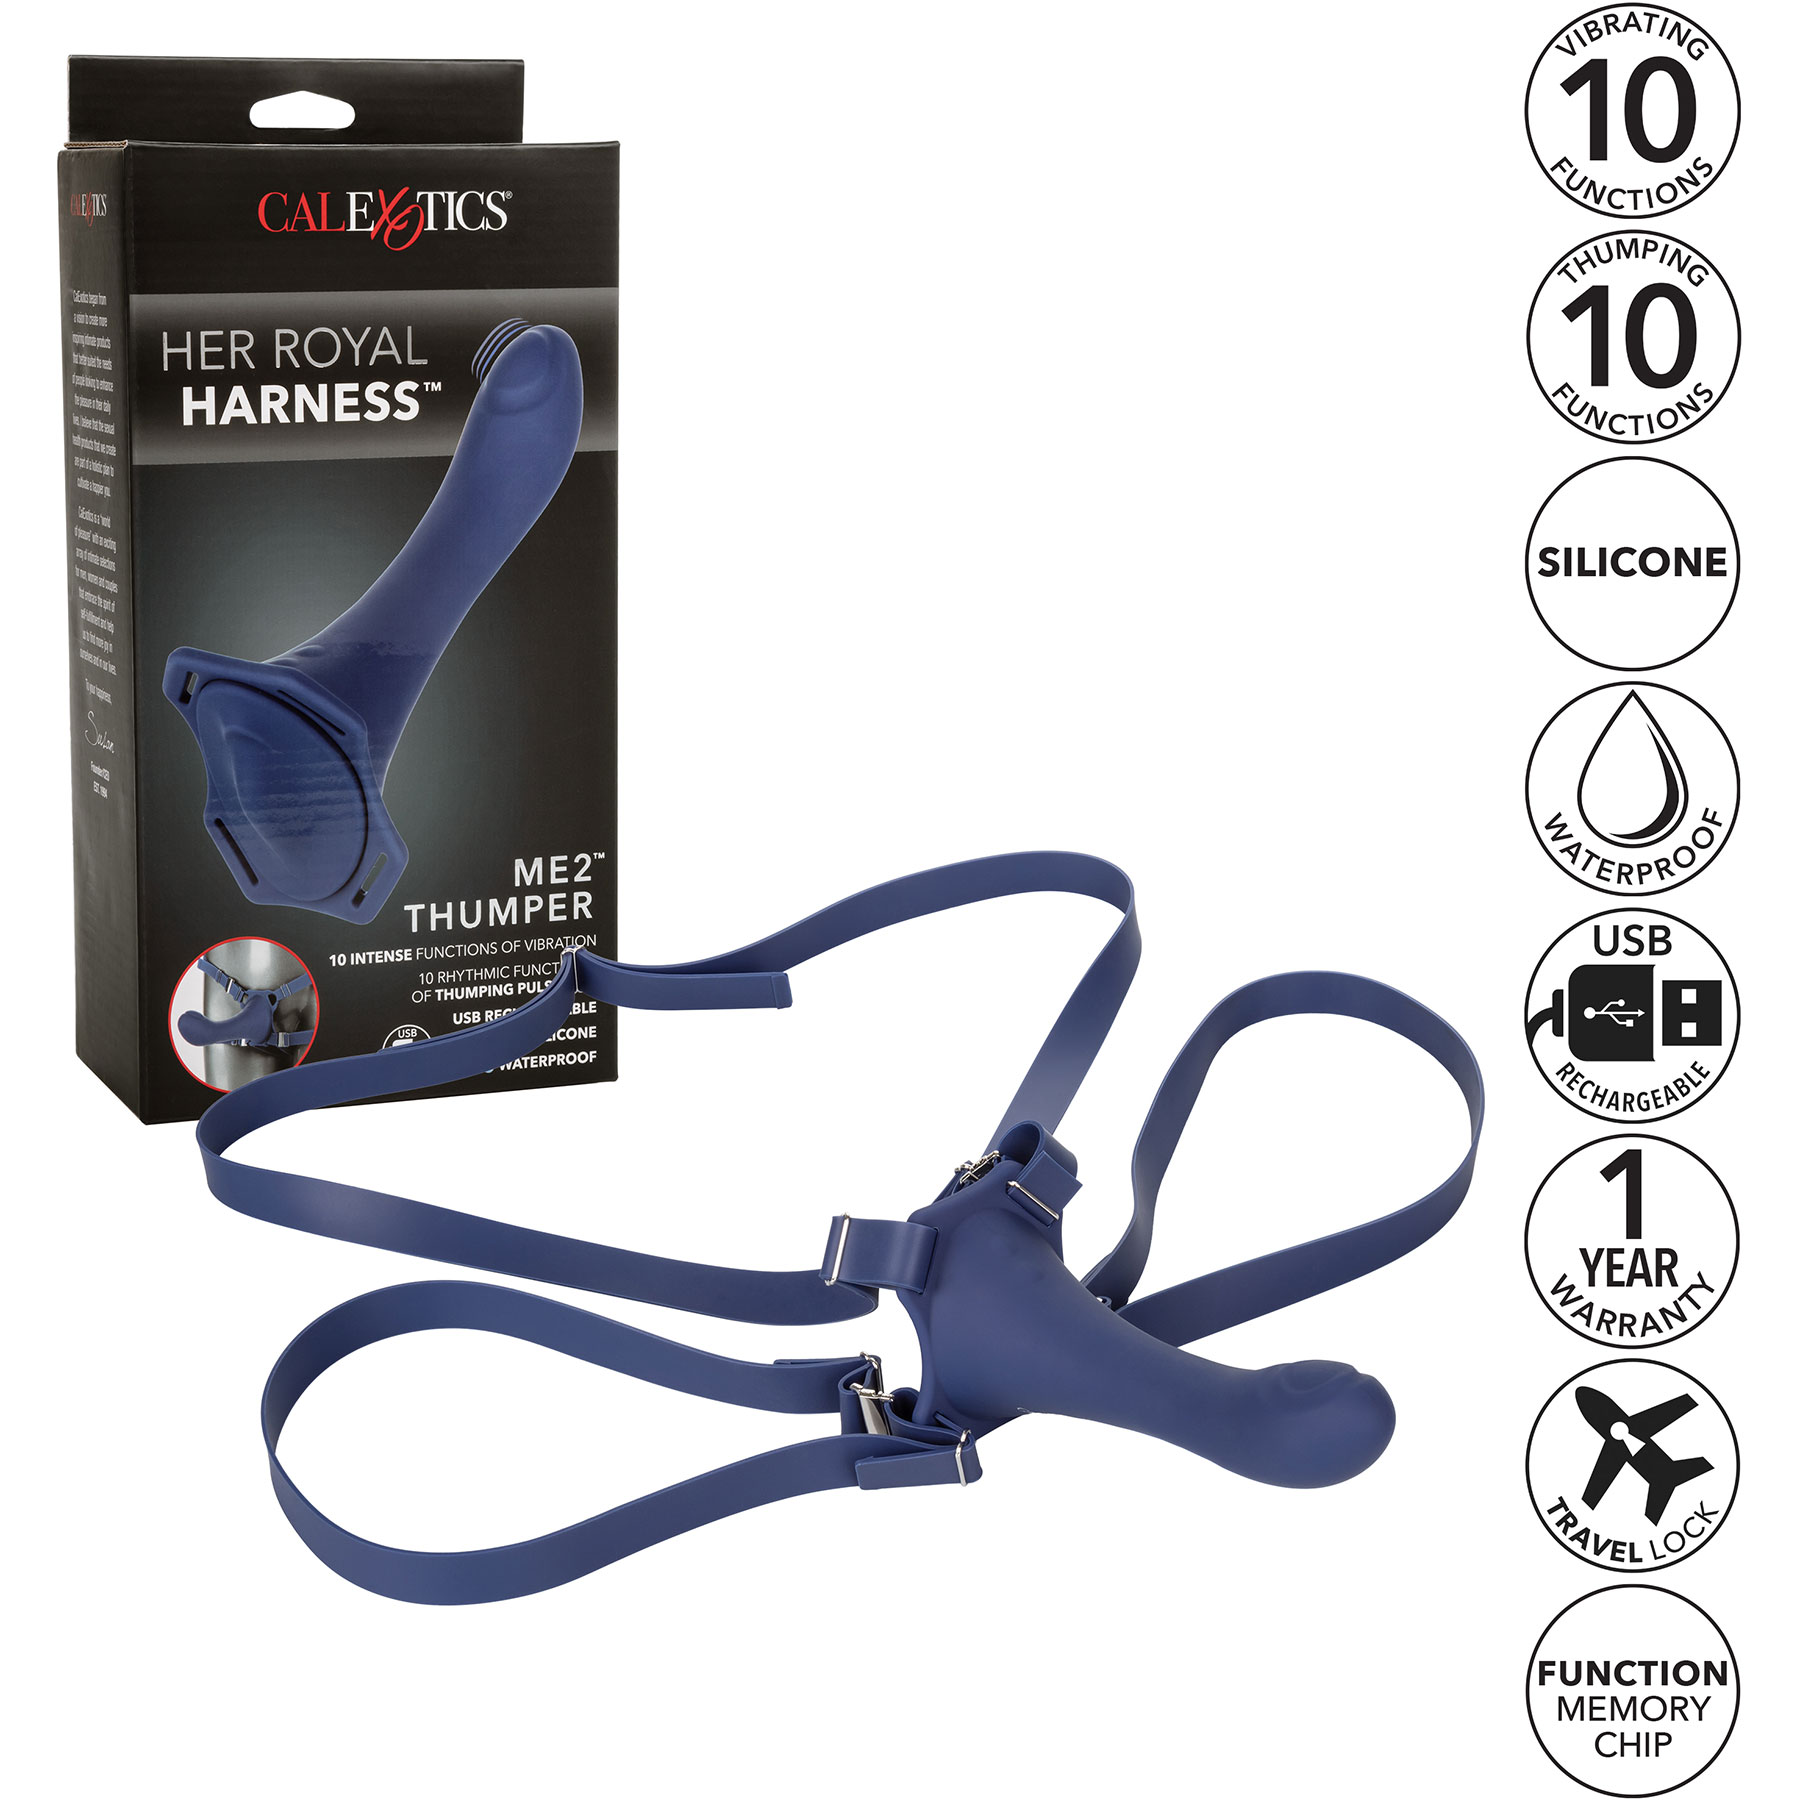 Her Royal Harness ME2 Thumper Set With Pulsing, Vibrating Silicone Probe - Features